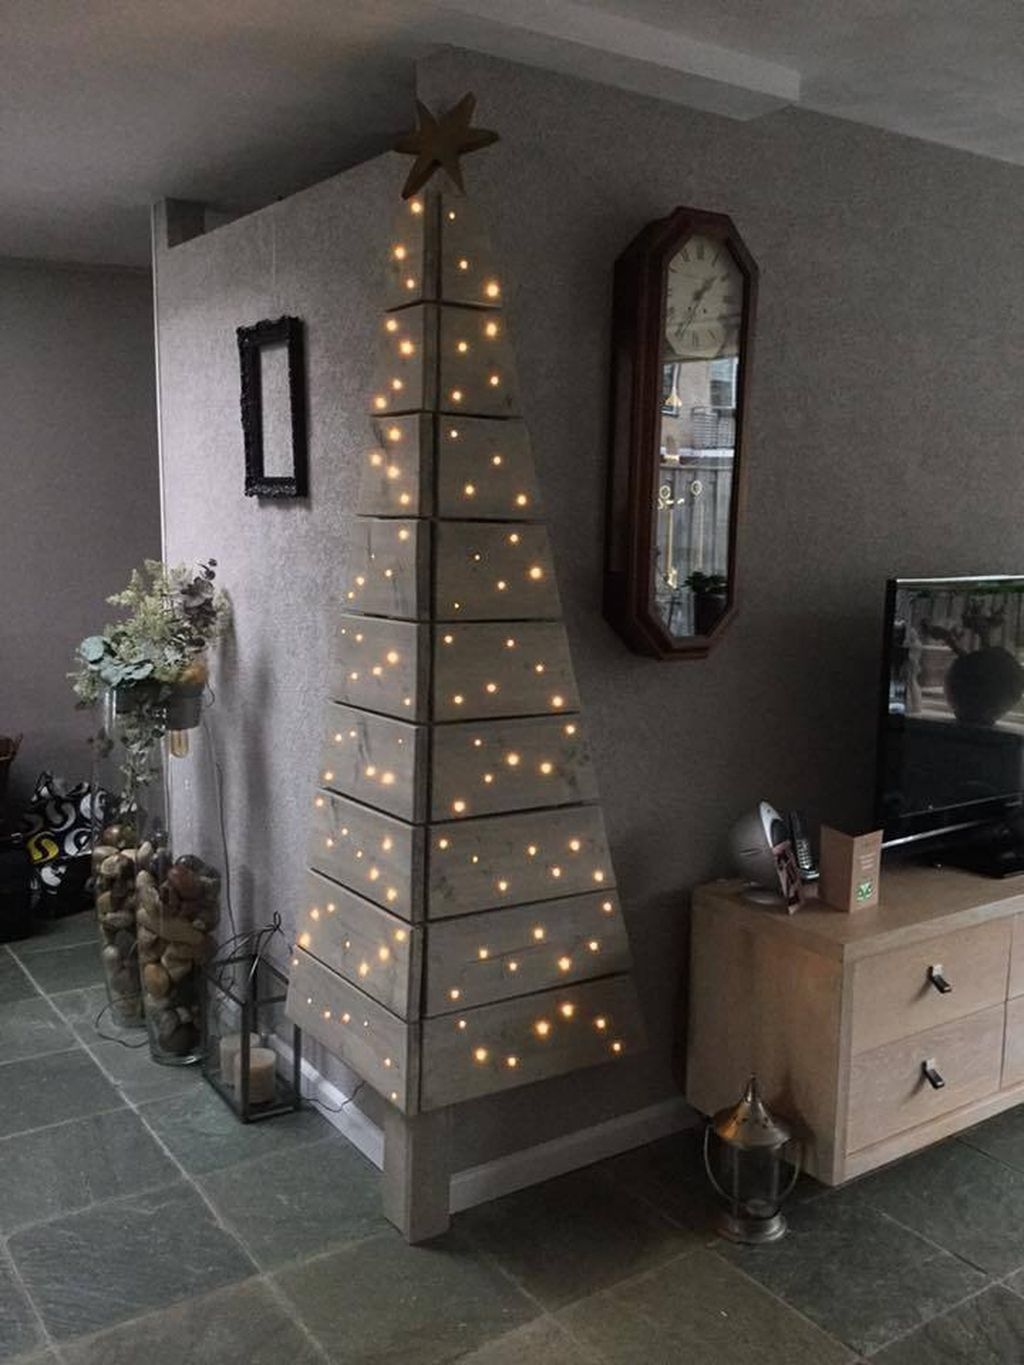 Inspiring Home Decoration Ideas With Small Christmas Tree 35